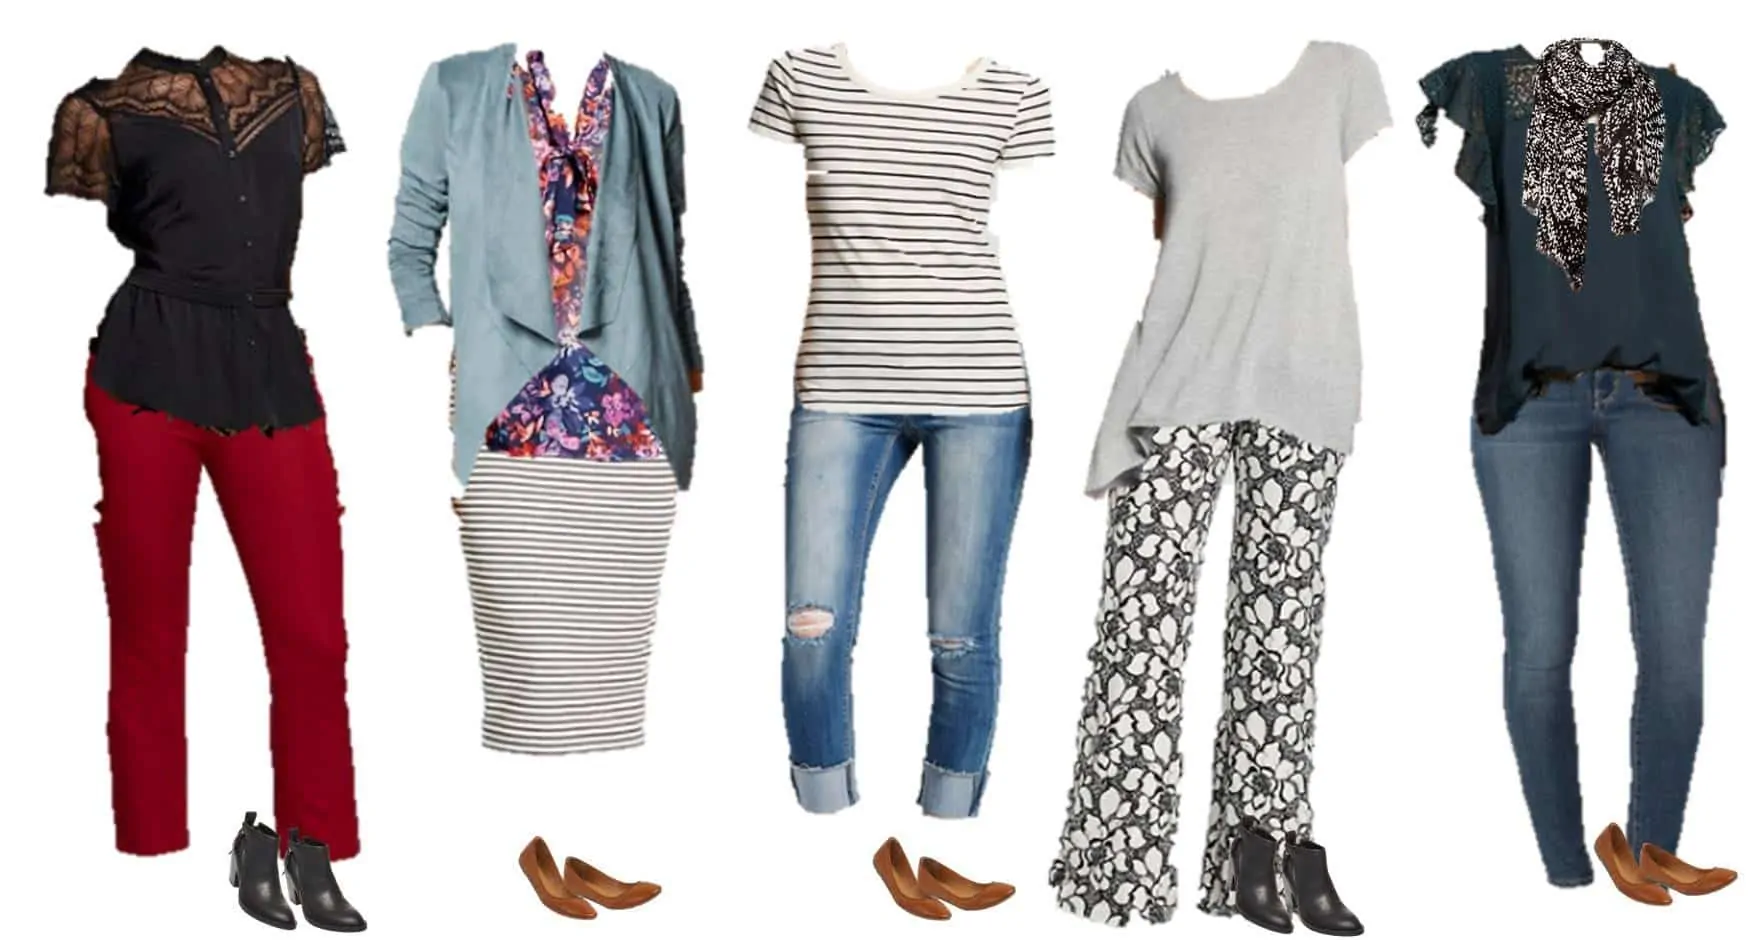 8.2 Mix and Match Fashion - Fall Styles from Target 6-10